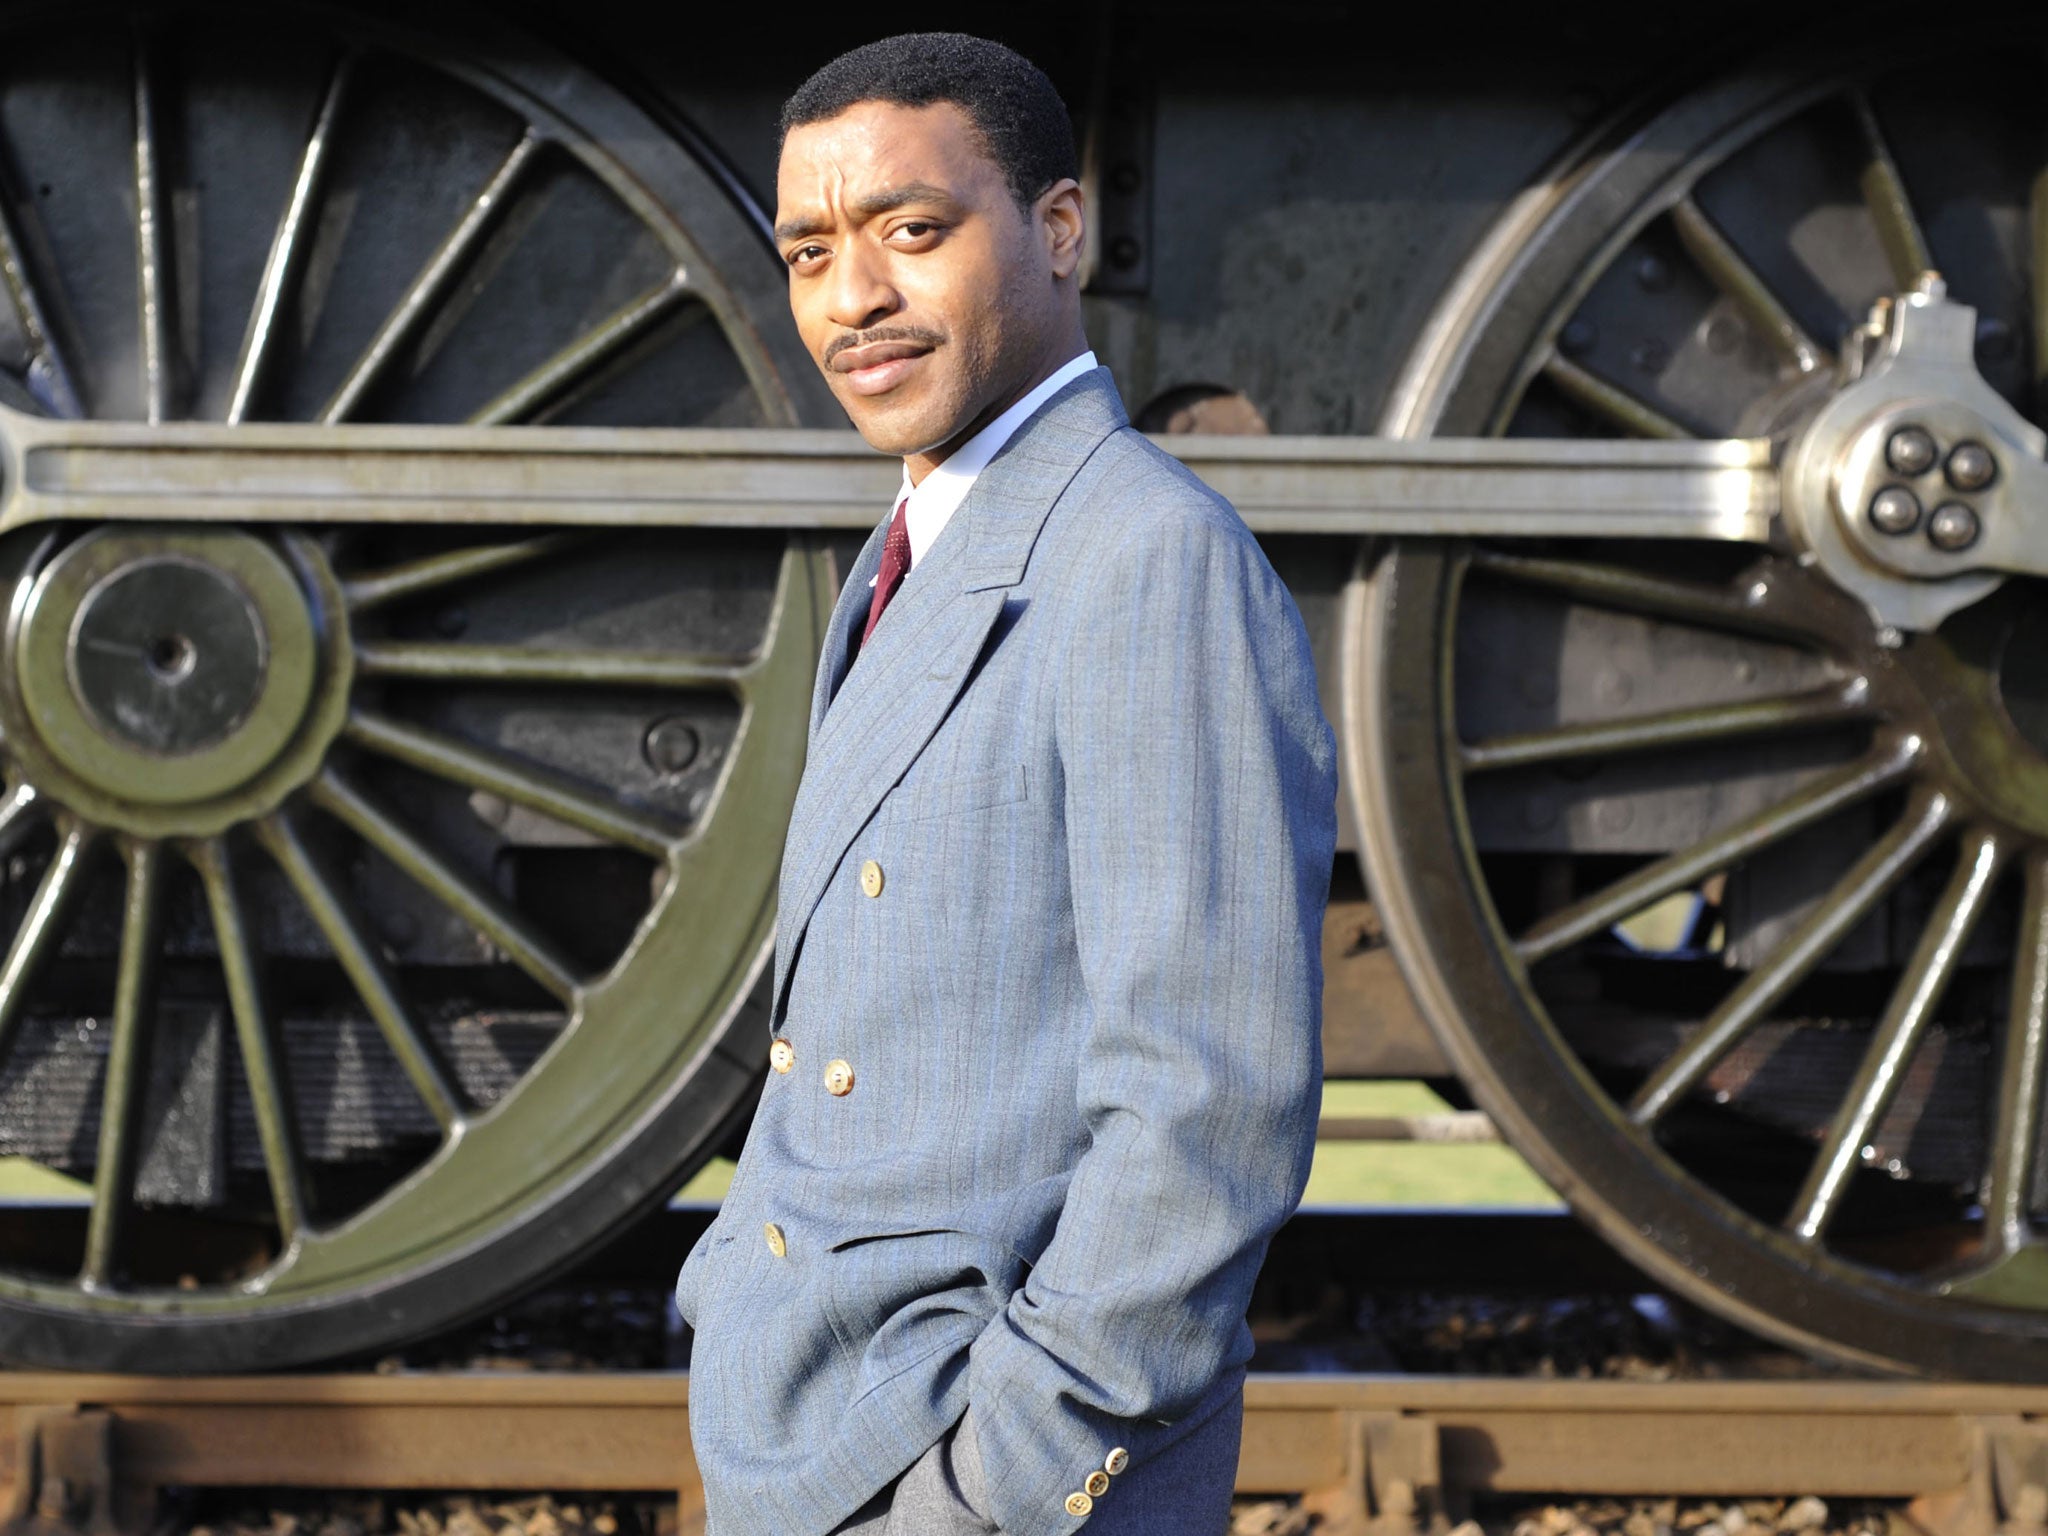 Chiwetel Ejiofor stars in the BBC's Dancing On The Edge